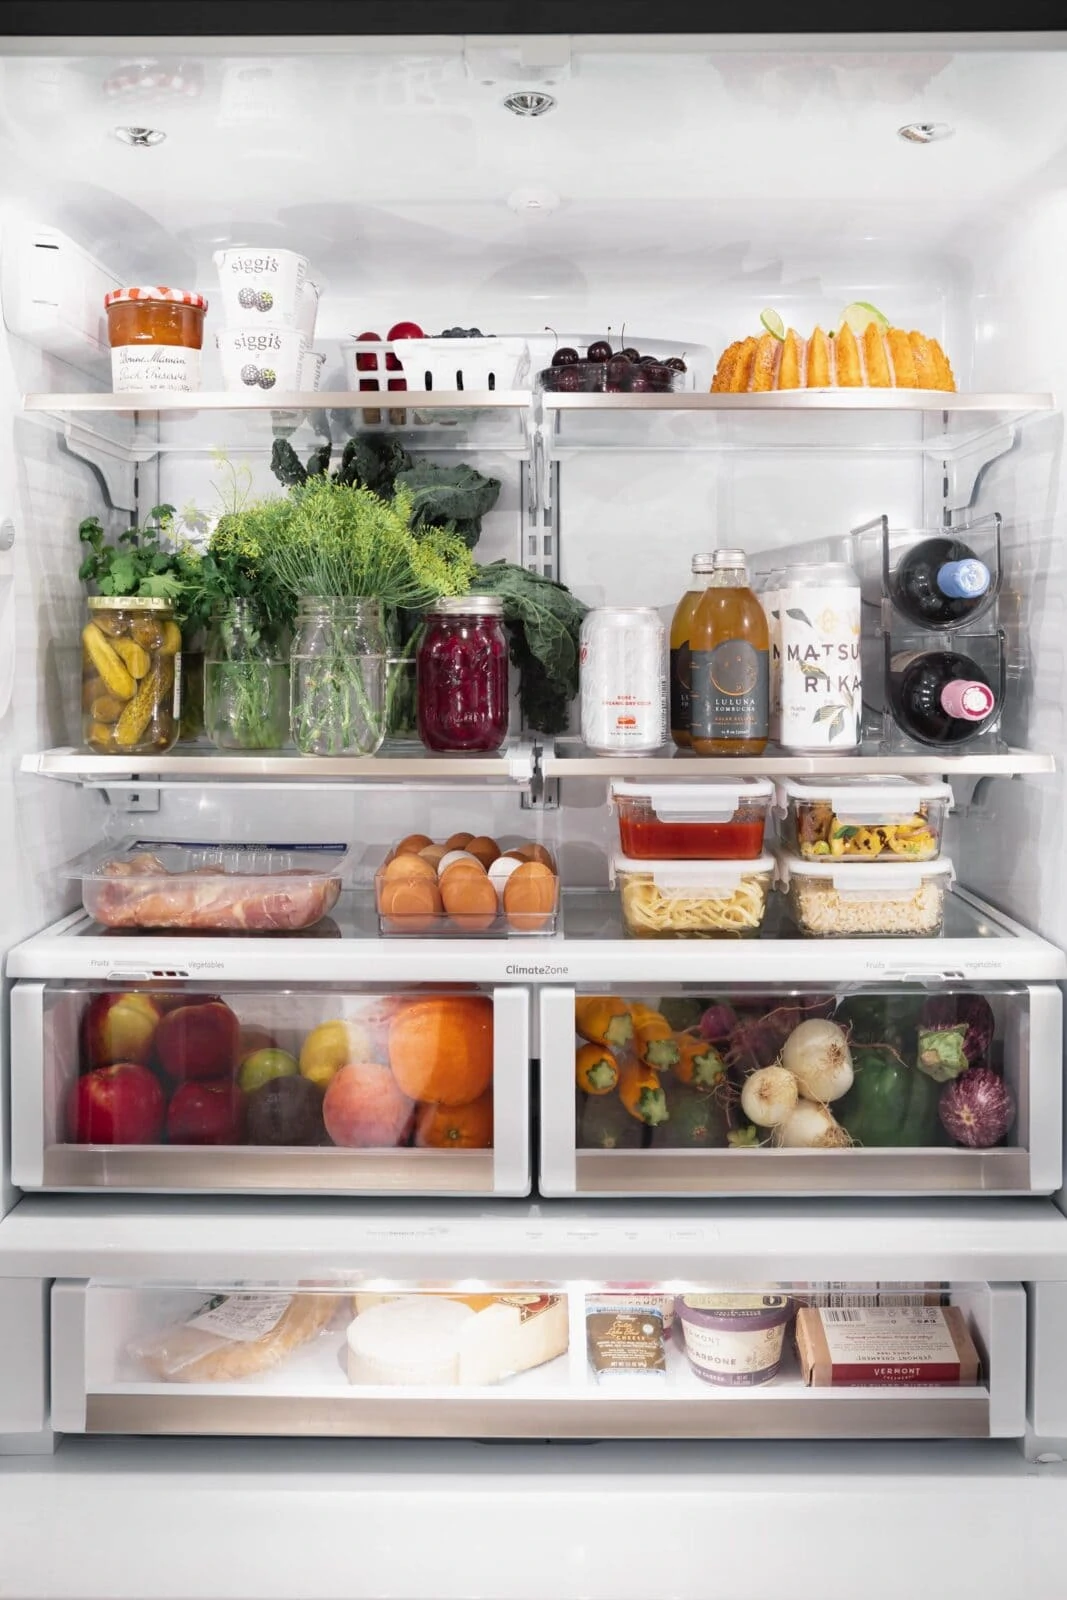 How to Organize your Fridge - the ultimate guide to fridge